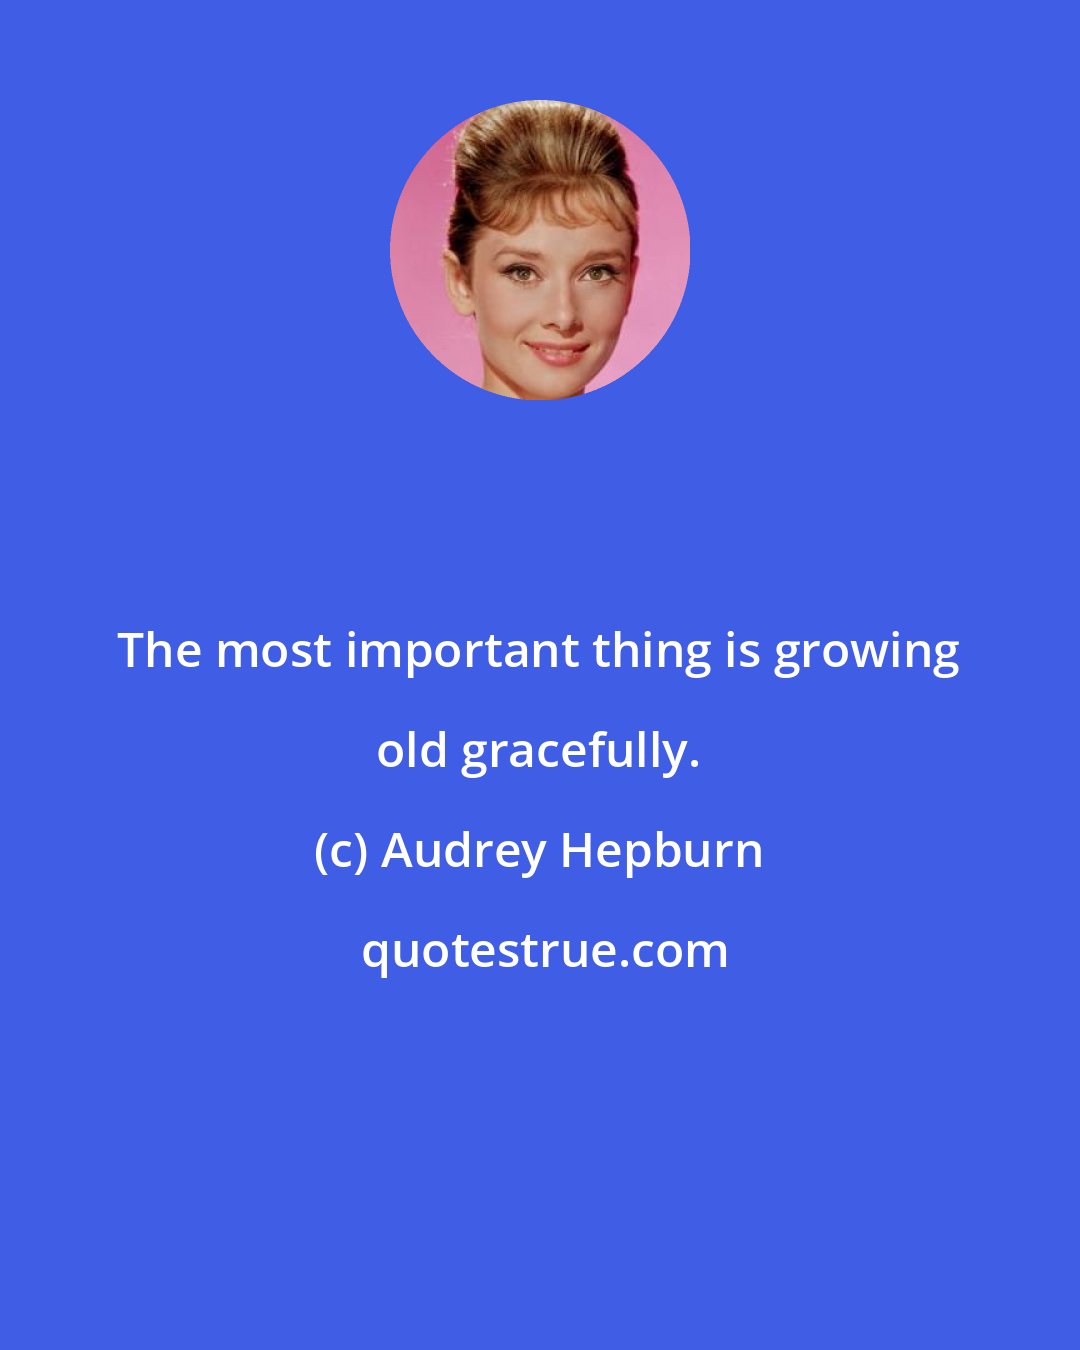 Audrey Hepburn: The most important thing is growing old gracefully.